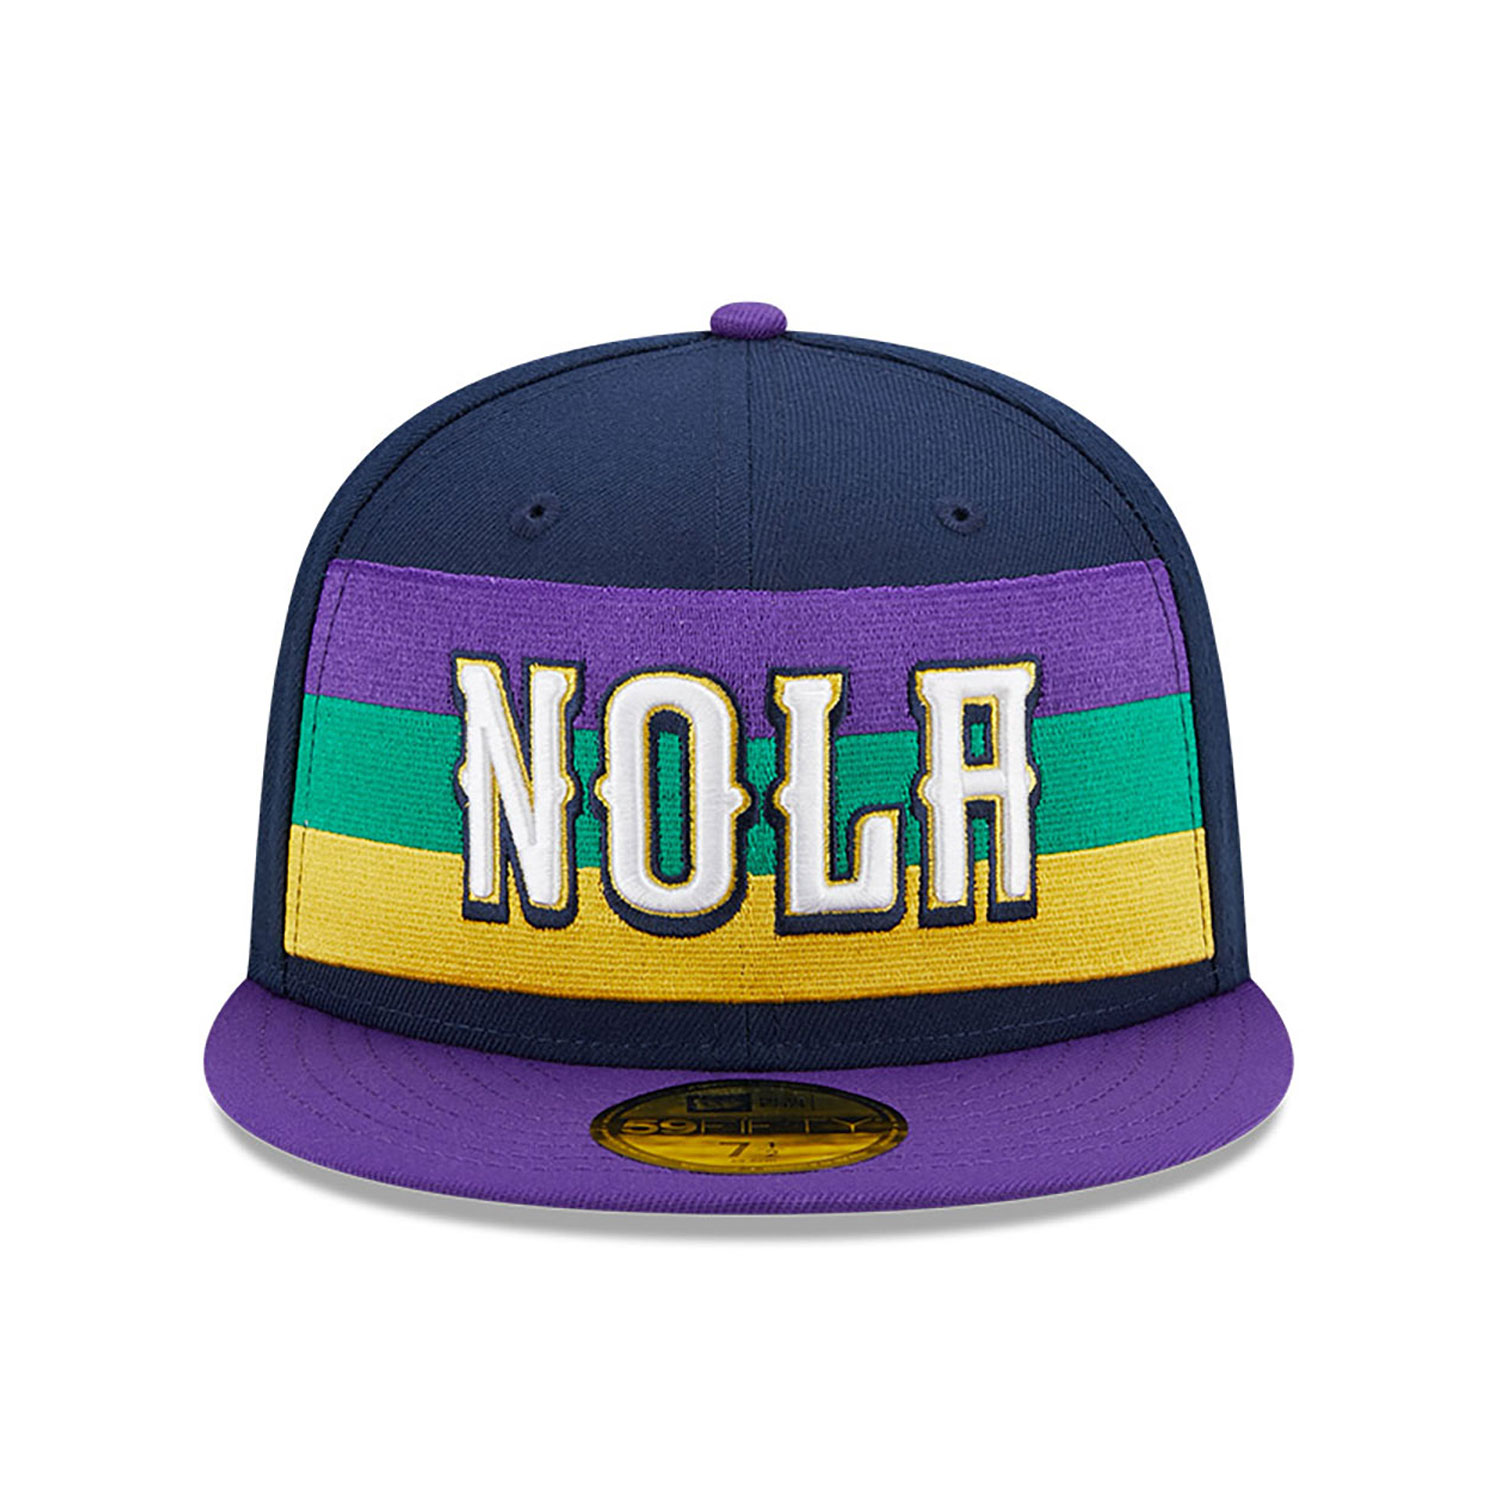 New Orleans Pelicans Authentics City Edition Navy 59FIFTY Fitted Cap